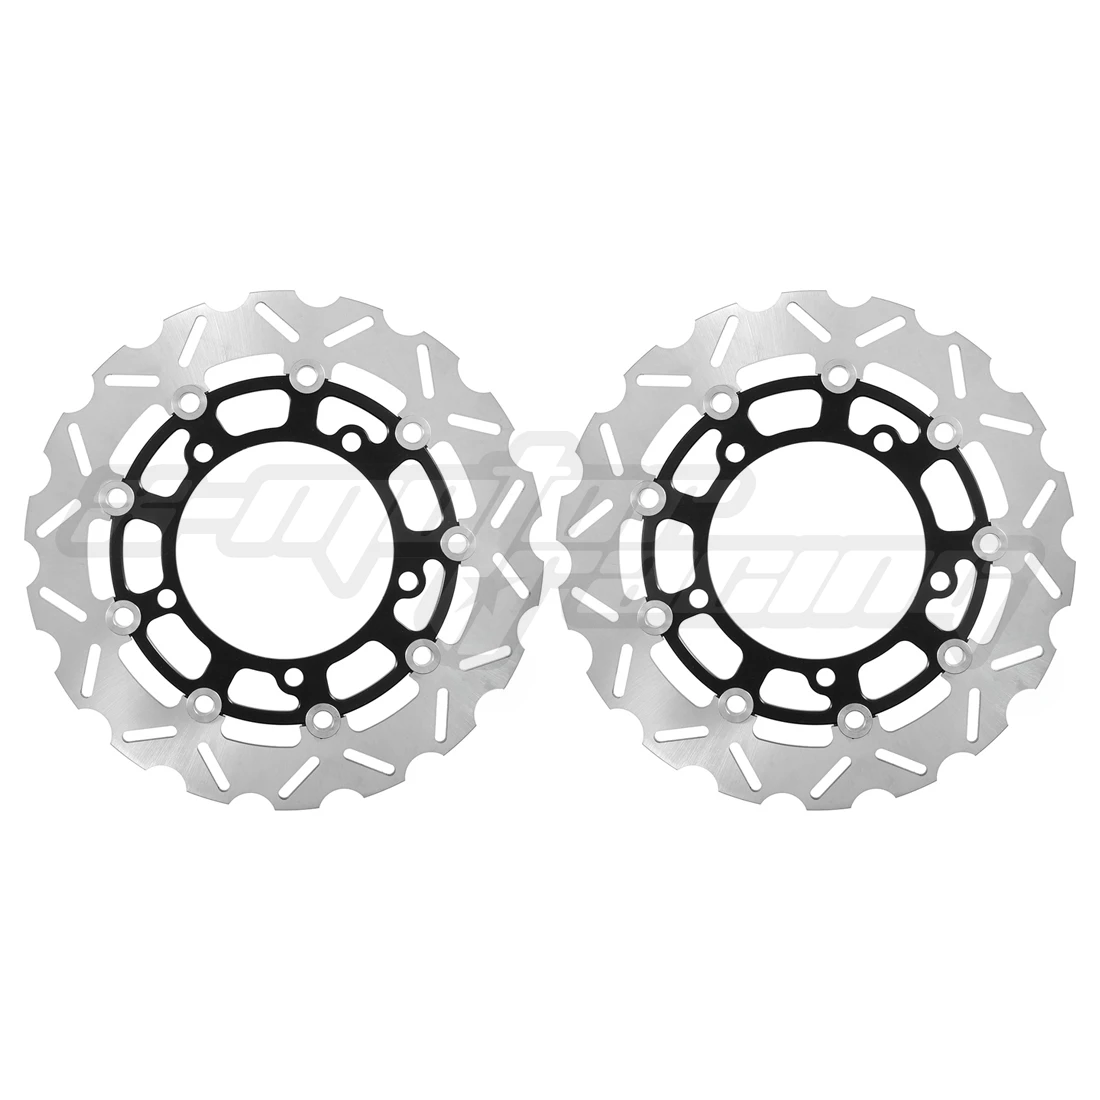 

Motorcycle Front Floating Brake Discs Rotors For SUZUKI SFV650 GLADIUS ABS 2009-2014 SV650 2007-2015 SV650S ABS 2007-2009